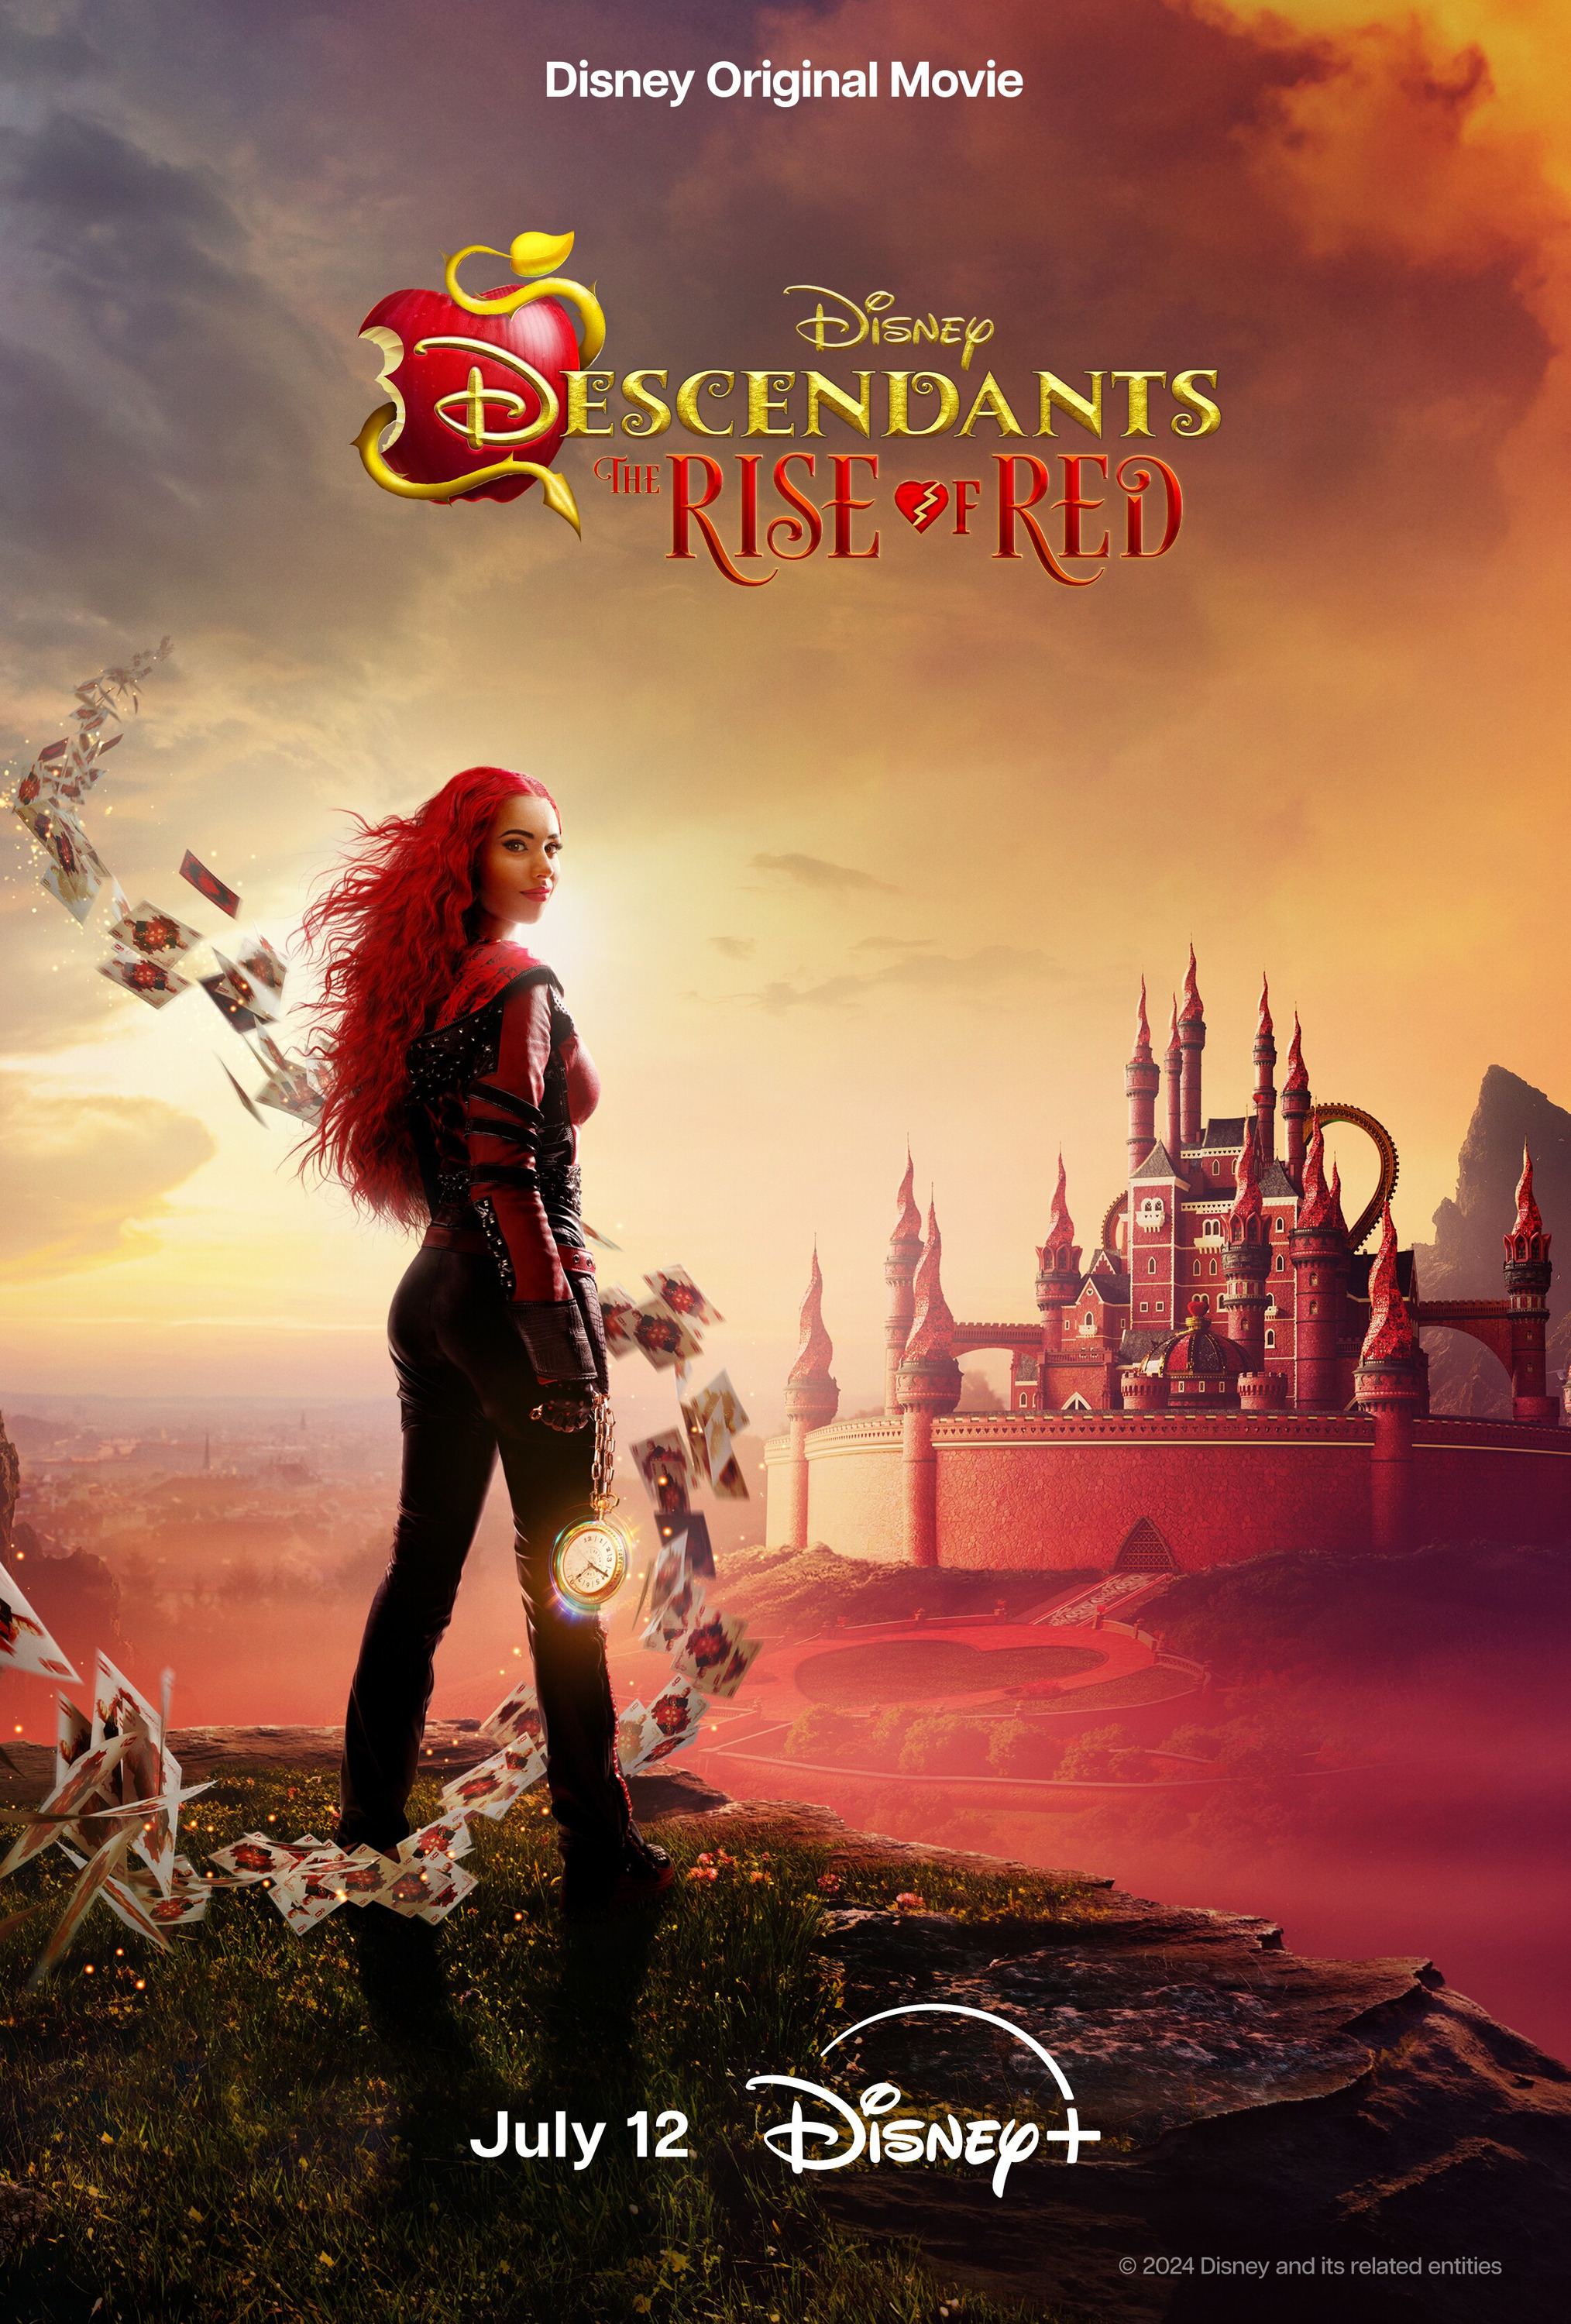 Mega Sized Movie Poster Image for Descendants: The Rise of Red (#1 of 11)